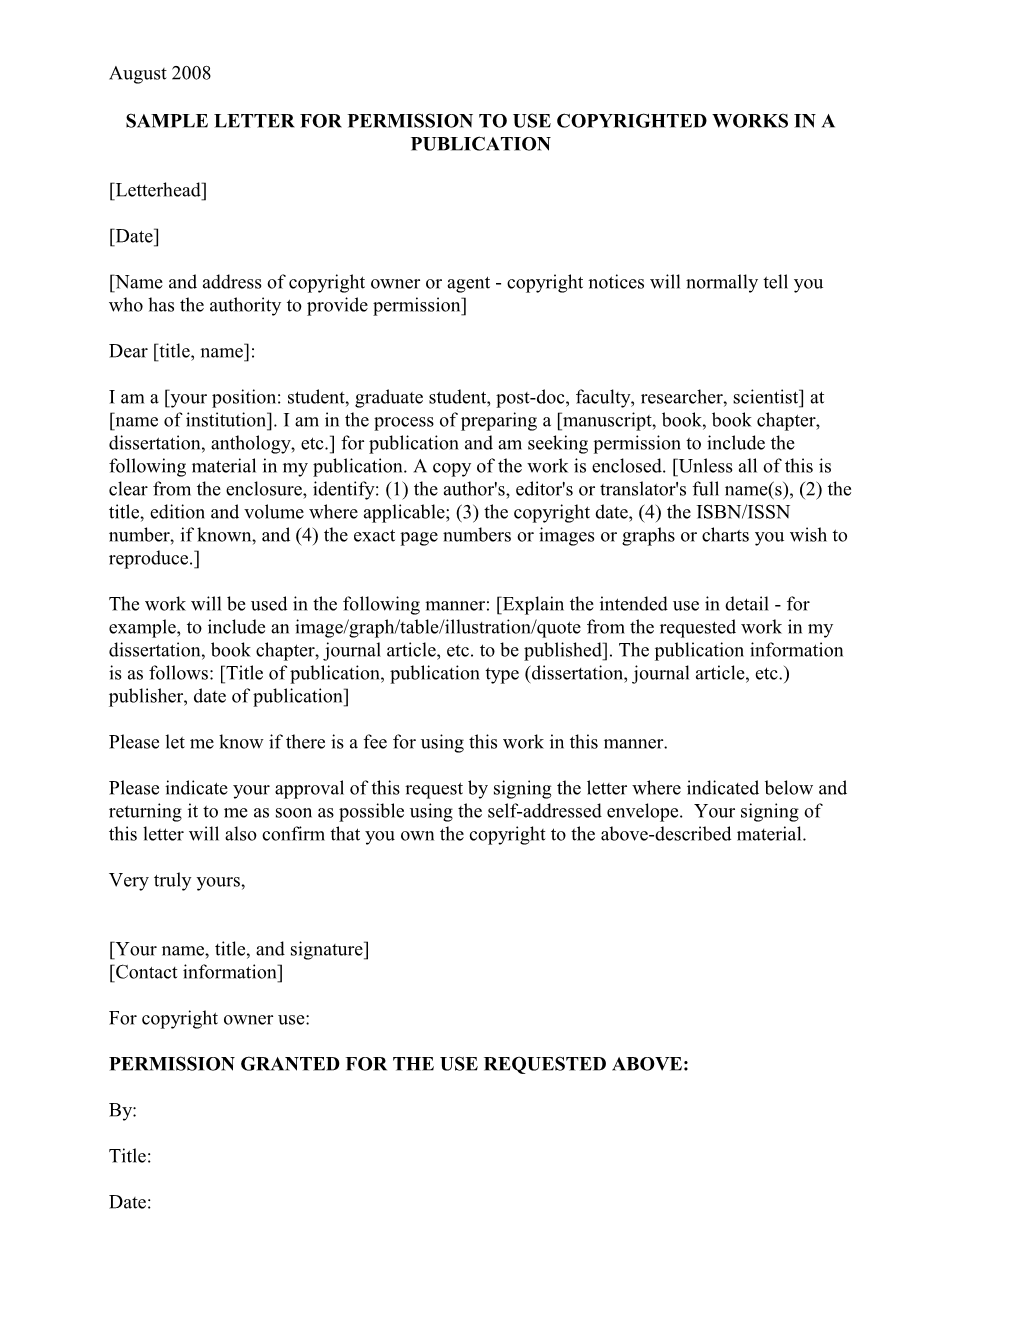 Sample Letter For Permission To Use Copyrighted Works In A Publication